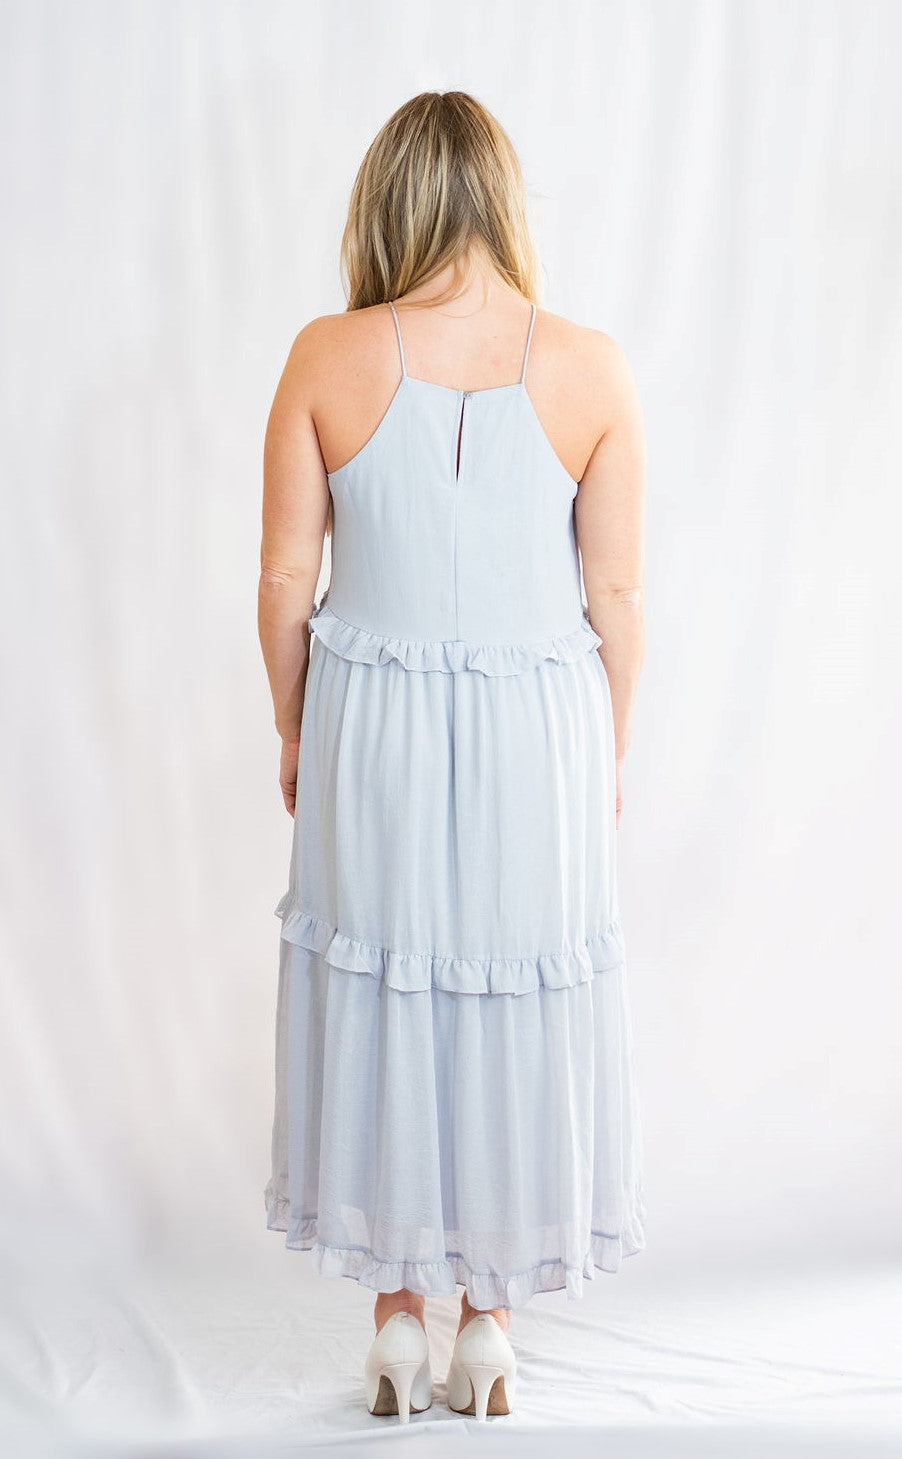 Cami Woven Midi Dress with Ruffled Detail by She + Sky